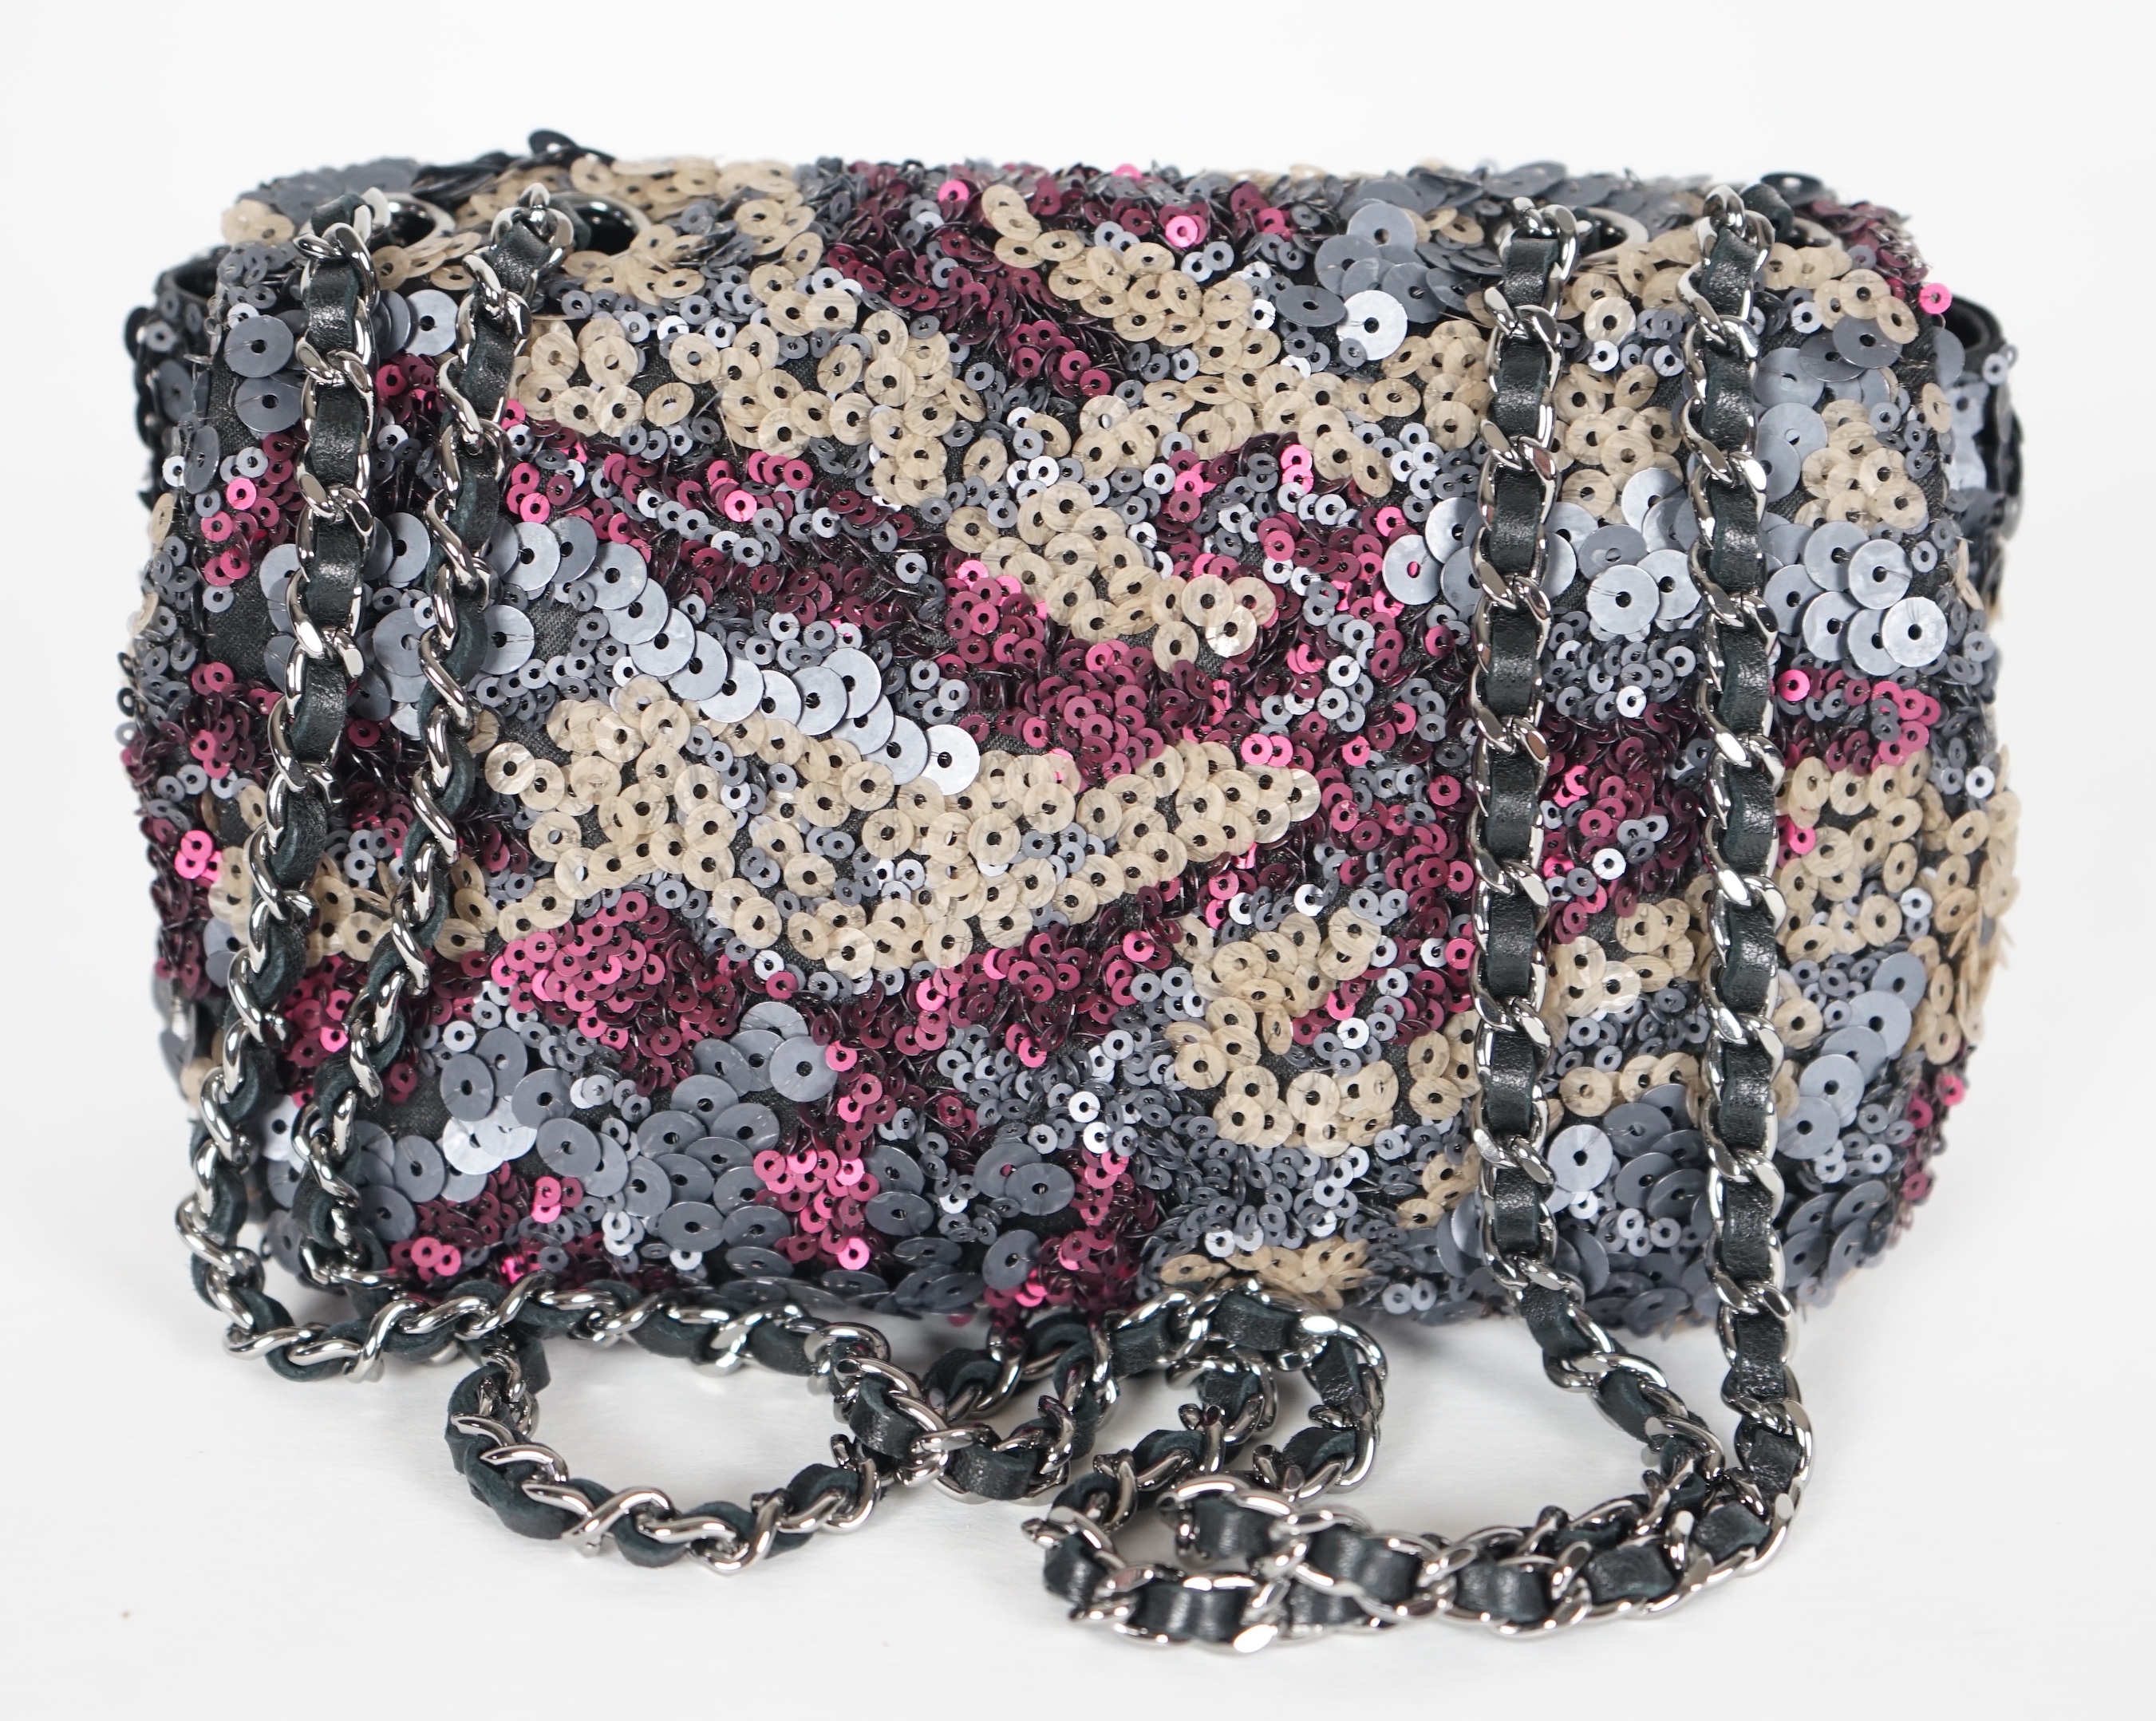 A Chanel 2012 Classique sequined mini shoulder bag, height 11cm, height overall 36cm, width18cm, depth 6.5cm, Please note this lot attracts an additional import tax of 20% on the hammer price